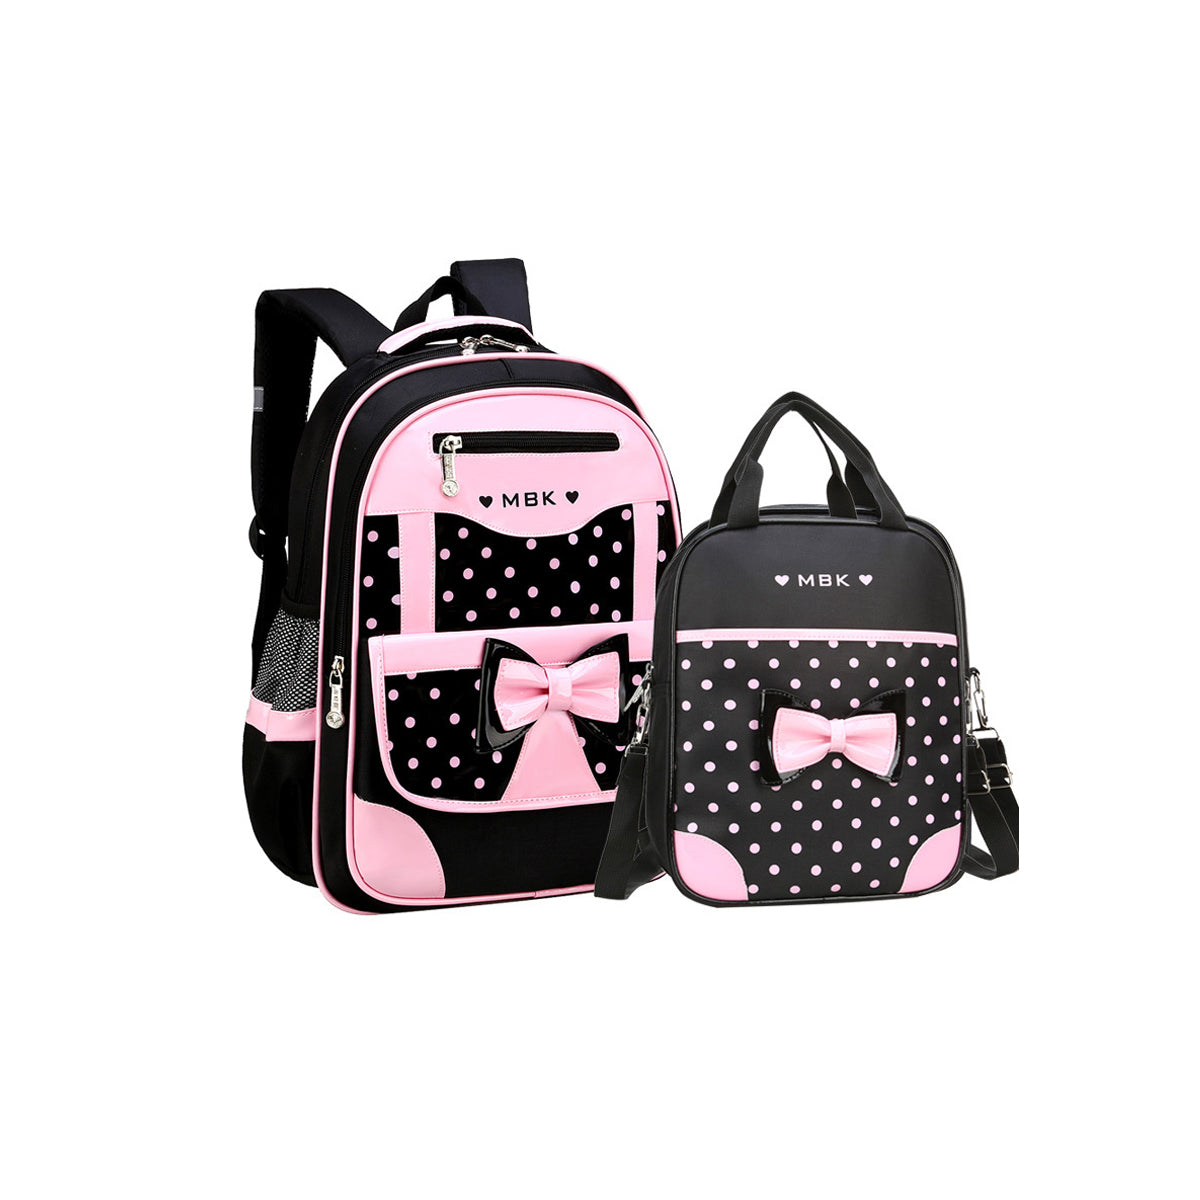 2Pcs Bowknot Wave Point Prints Primary School Backpack